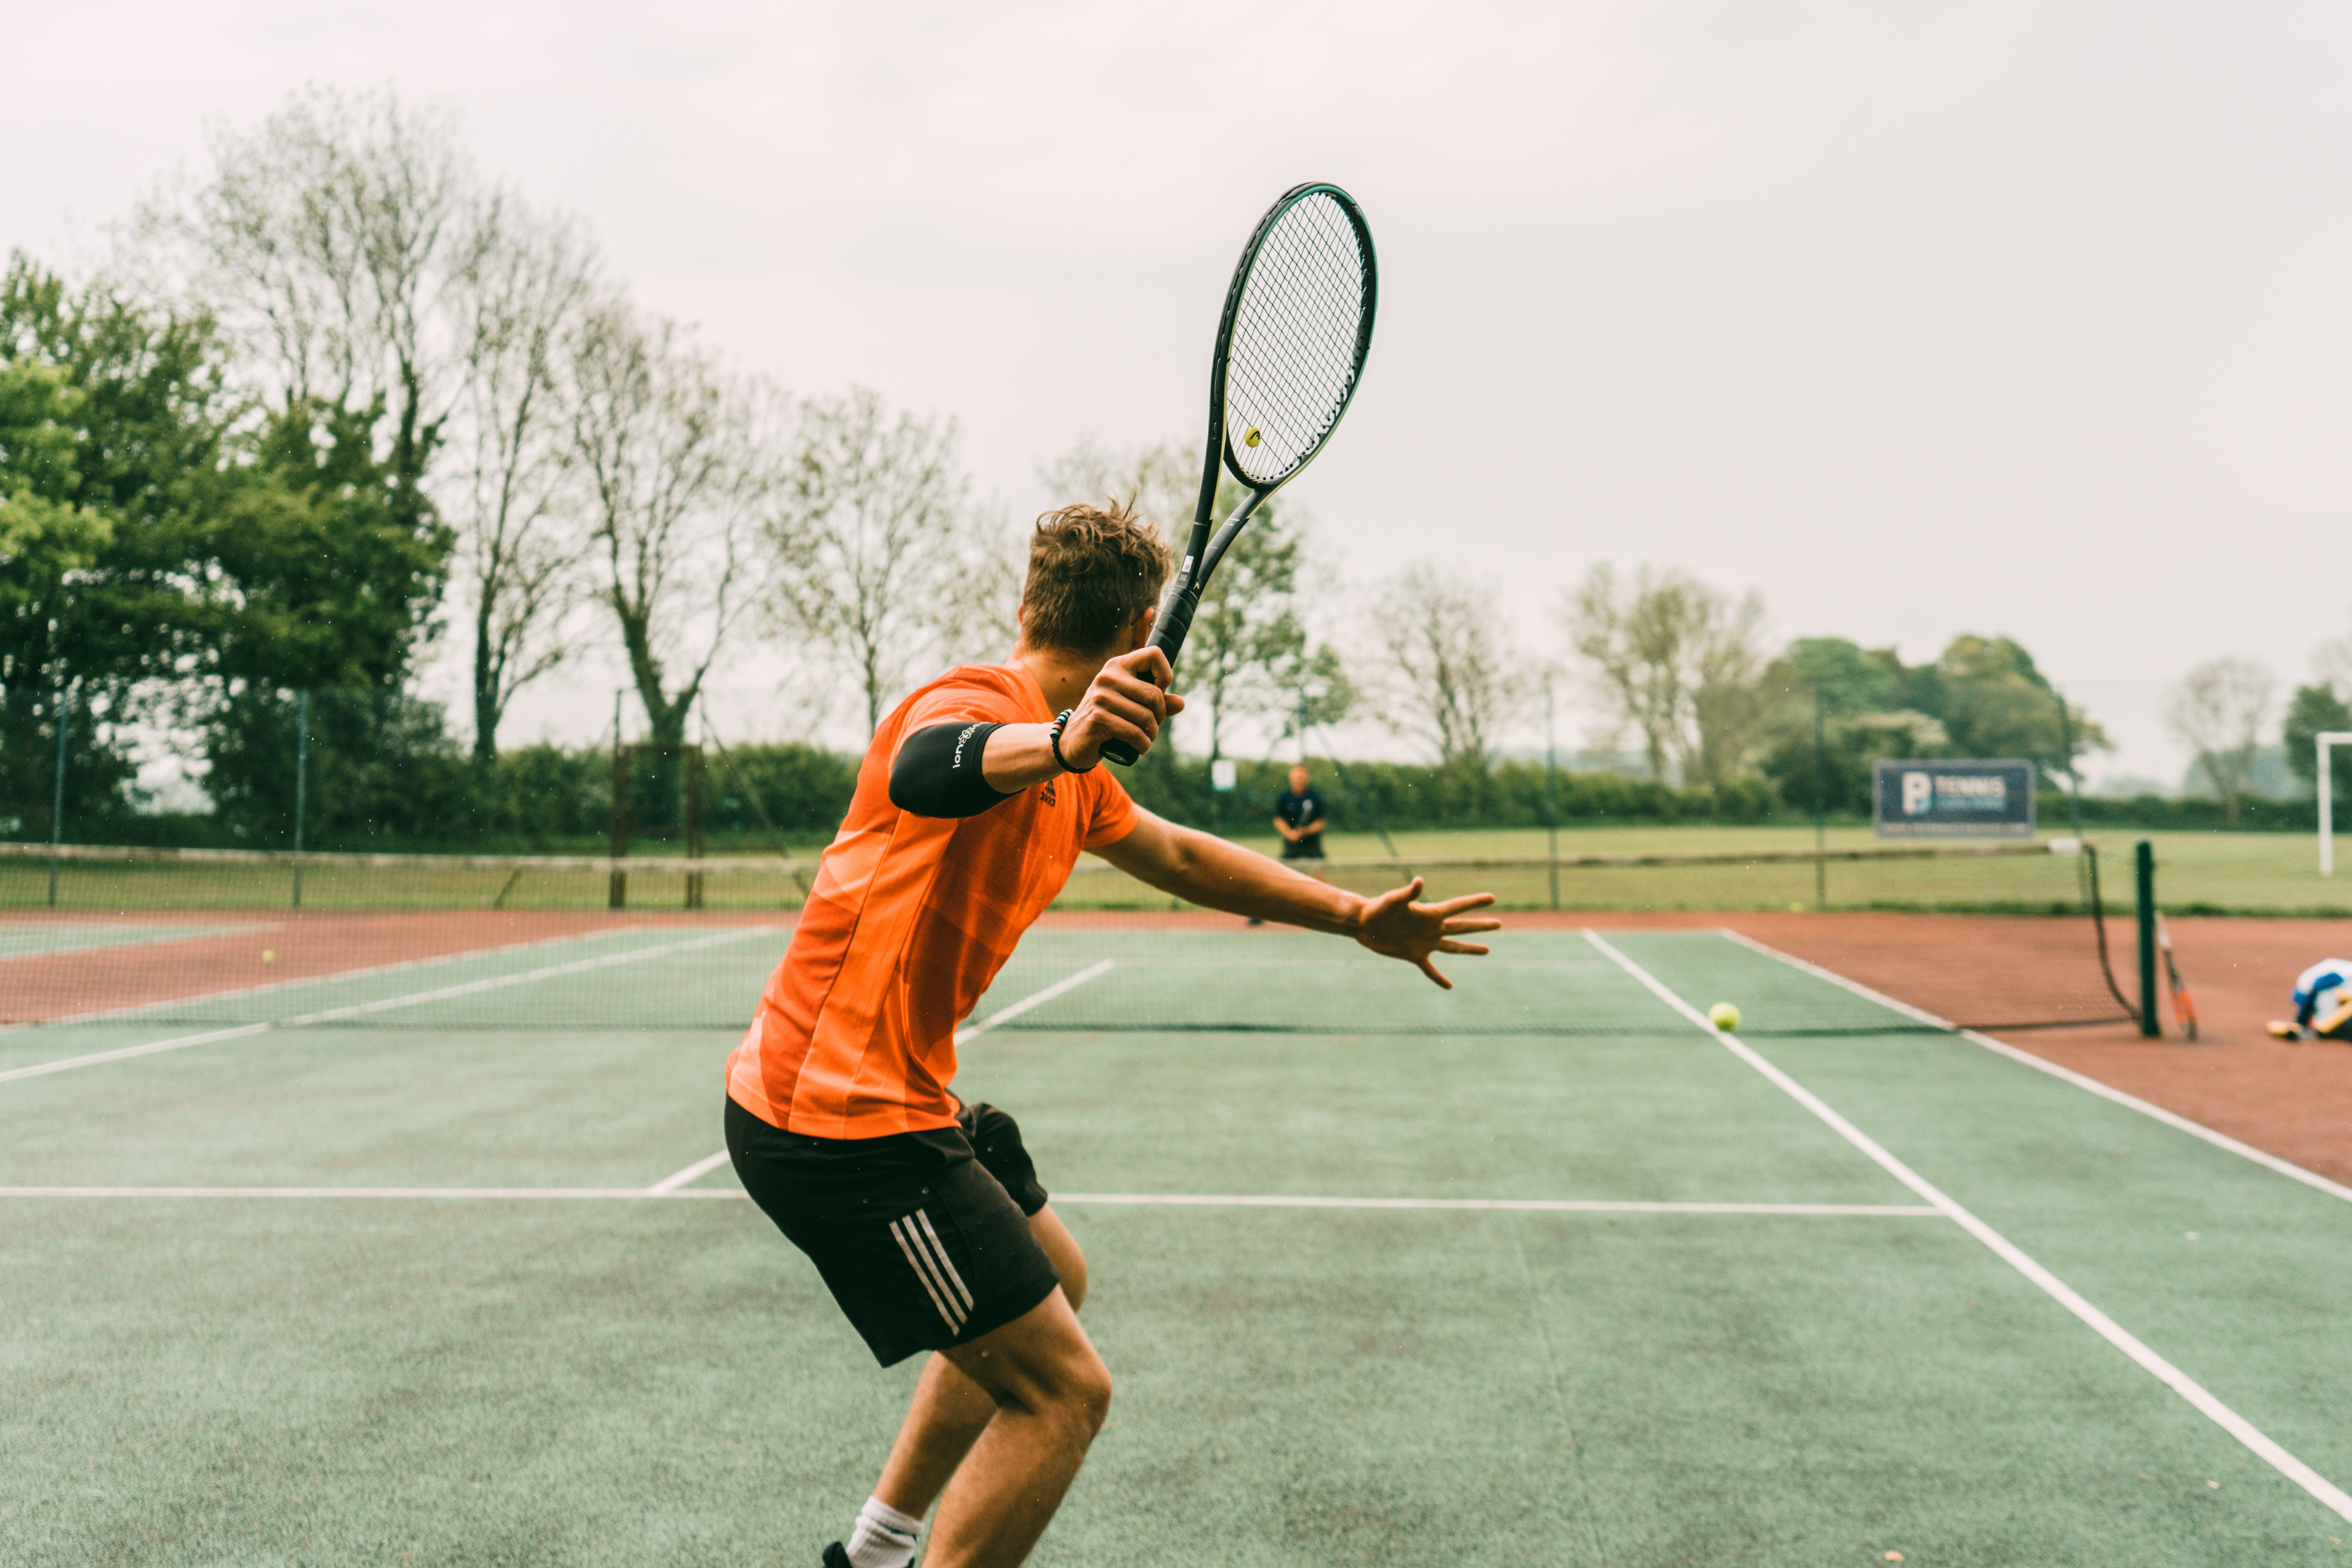 tech bootstrapping is like tennis